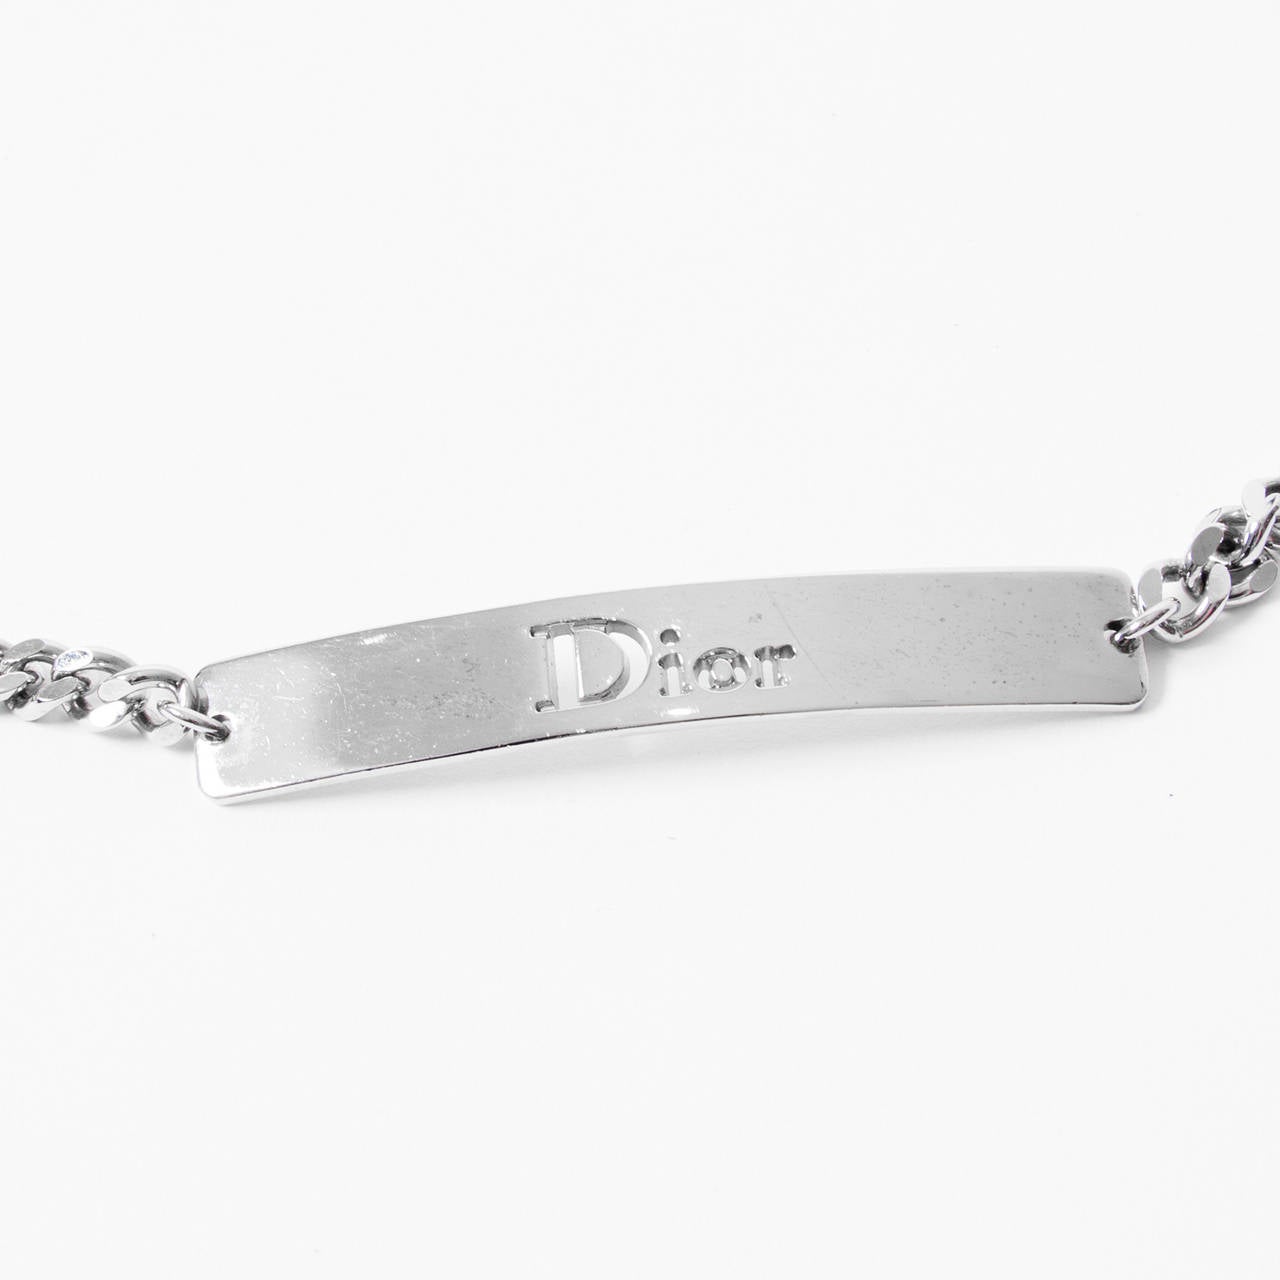 Dior laqué leather and chain belt featuring a detailed strass closure.